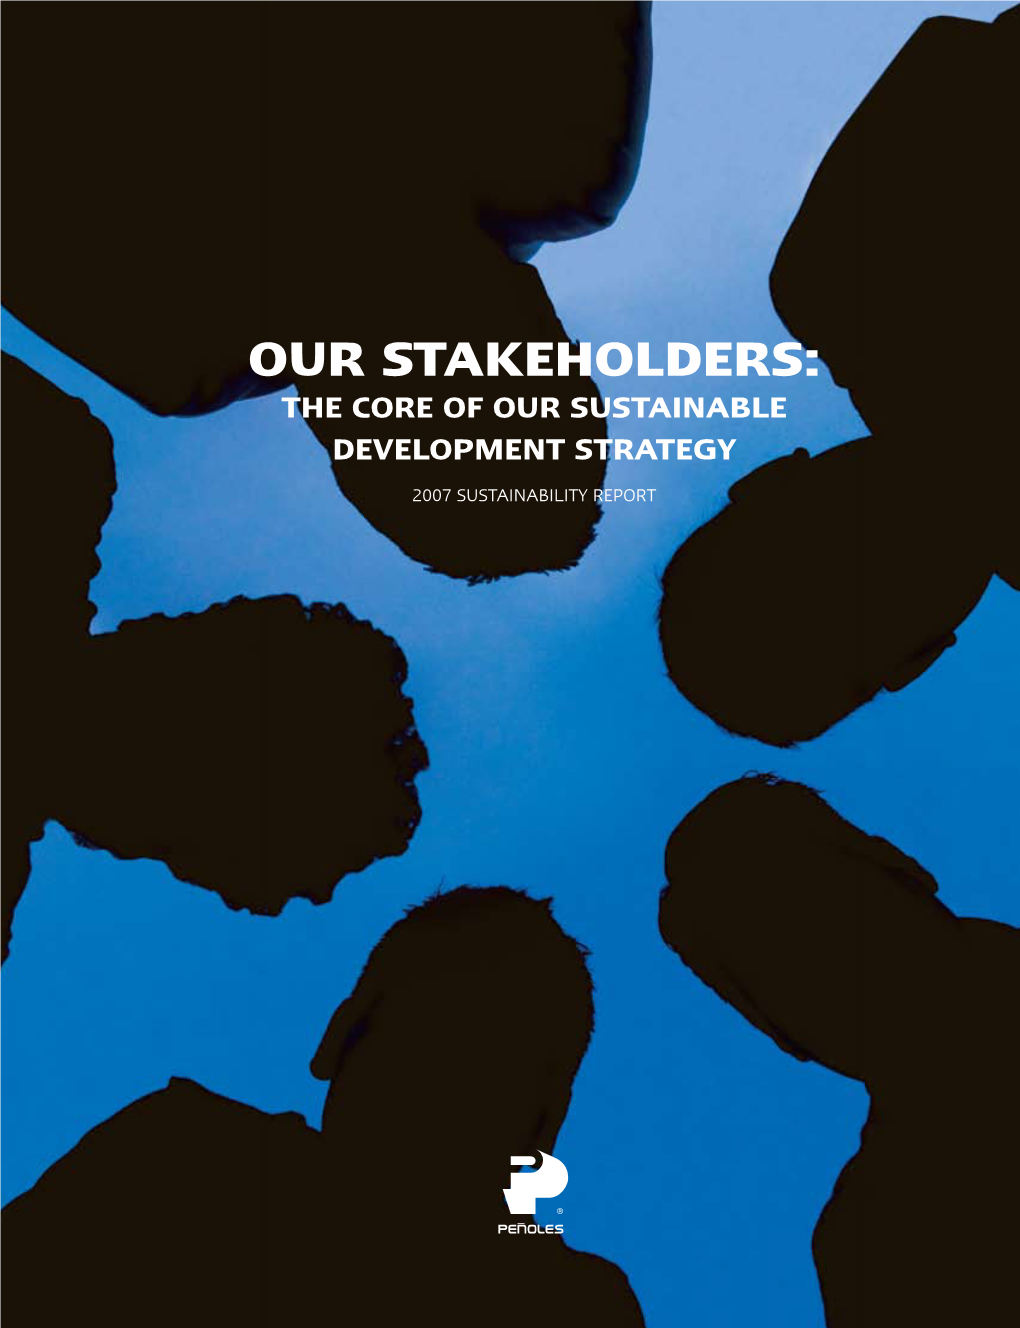 Our Stakeholders: the Core of Our Sustainable Development Strategy 2007 Sustainability Report About This Report (3.1, 3.2, 3.3, 3.5, 3.6, 3.7, 3.8, 3.9, 3.13)